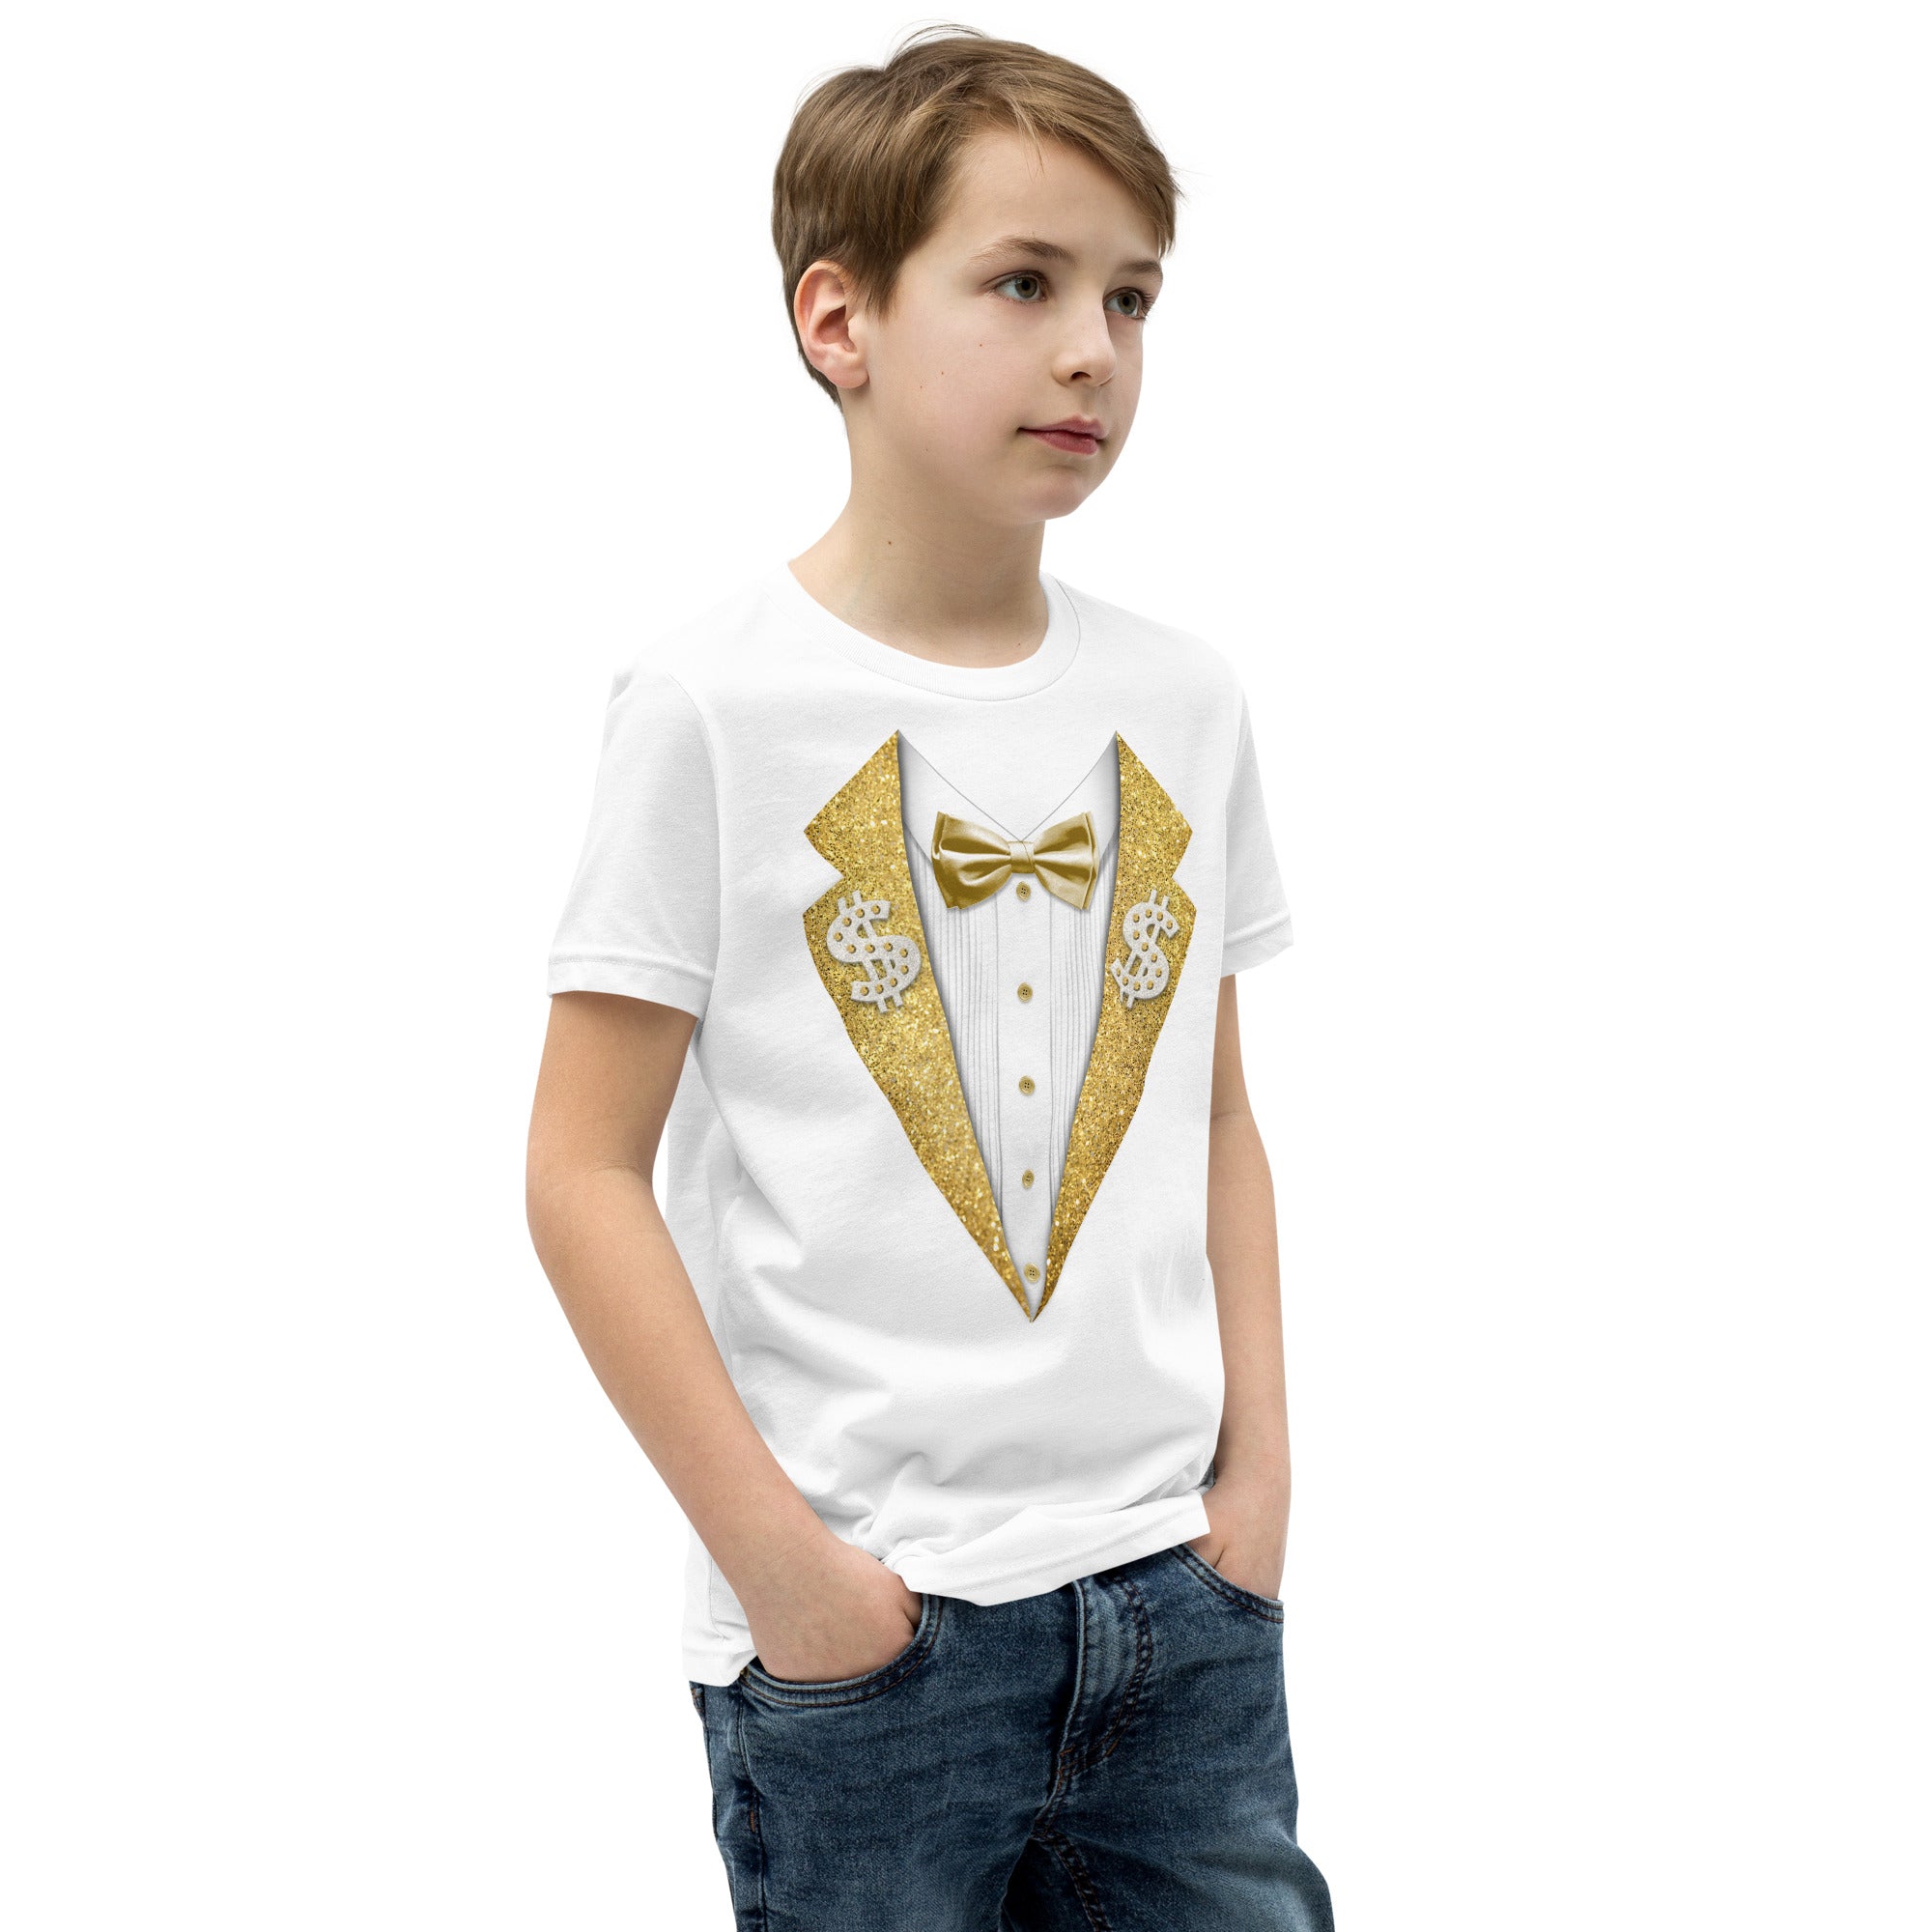 Ted DiBiase - White & Gold Youth Suit Tee